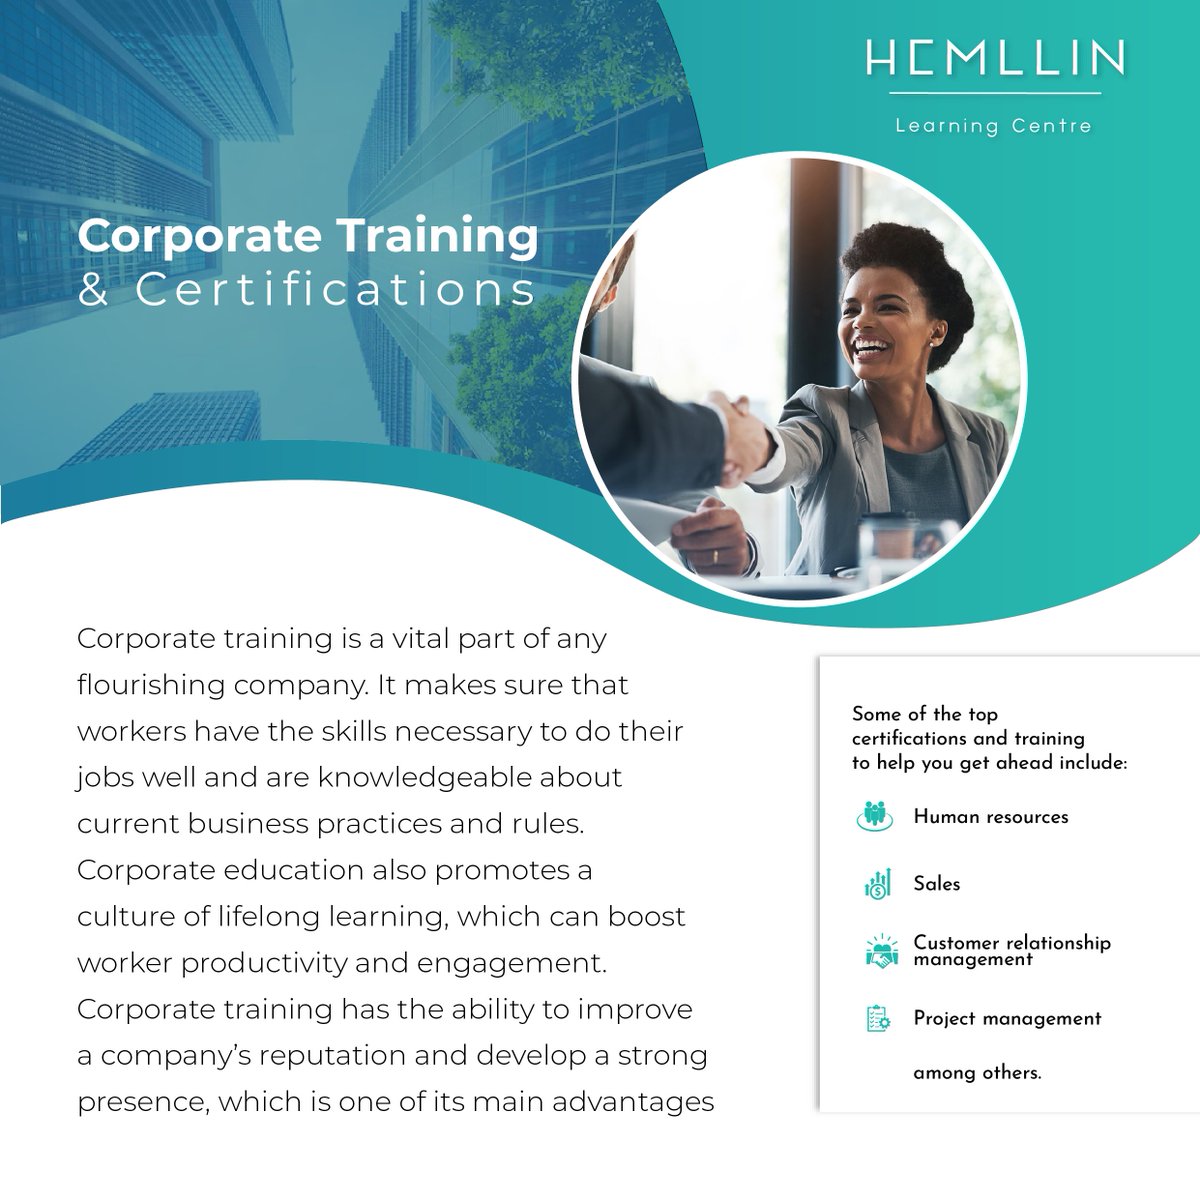 In business, keeping your team sharp is key. So, it's time to give your staff the tools they need to thrive. Let's chat about how we can whip your training programs into shape and get your team certified and set up for success!

#corporatetraining #upskilling #instatrending